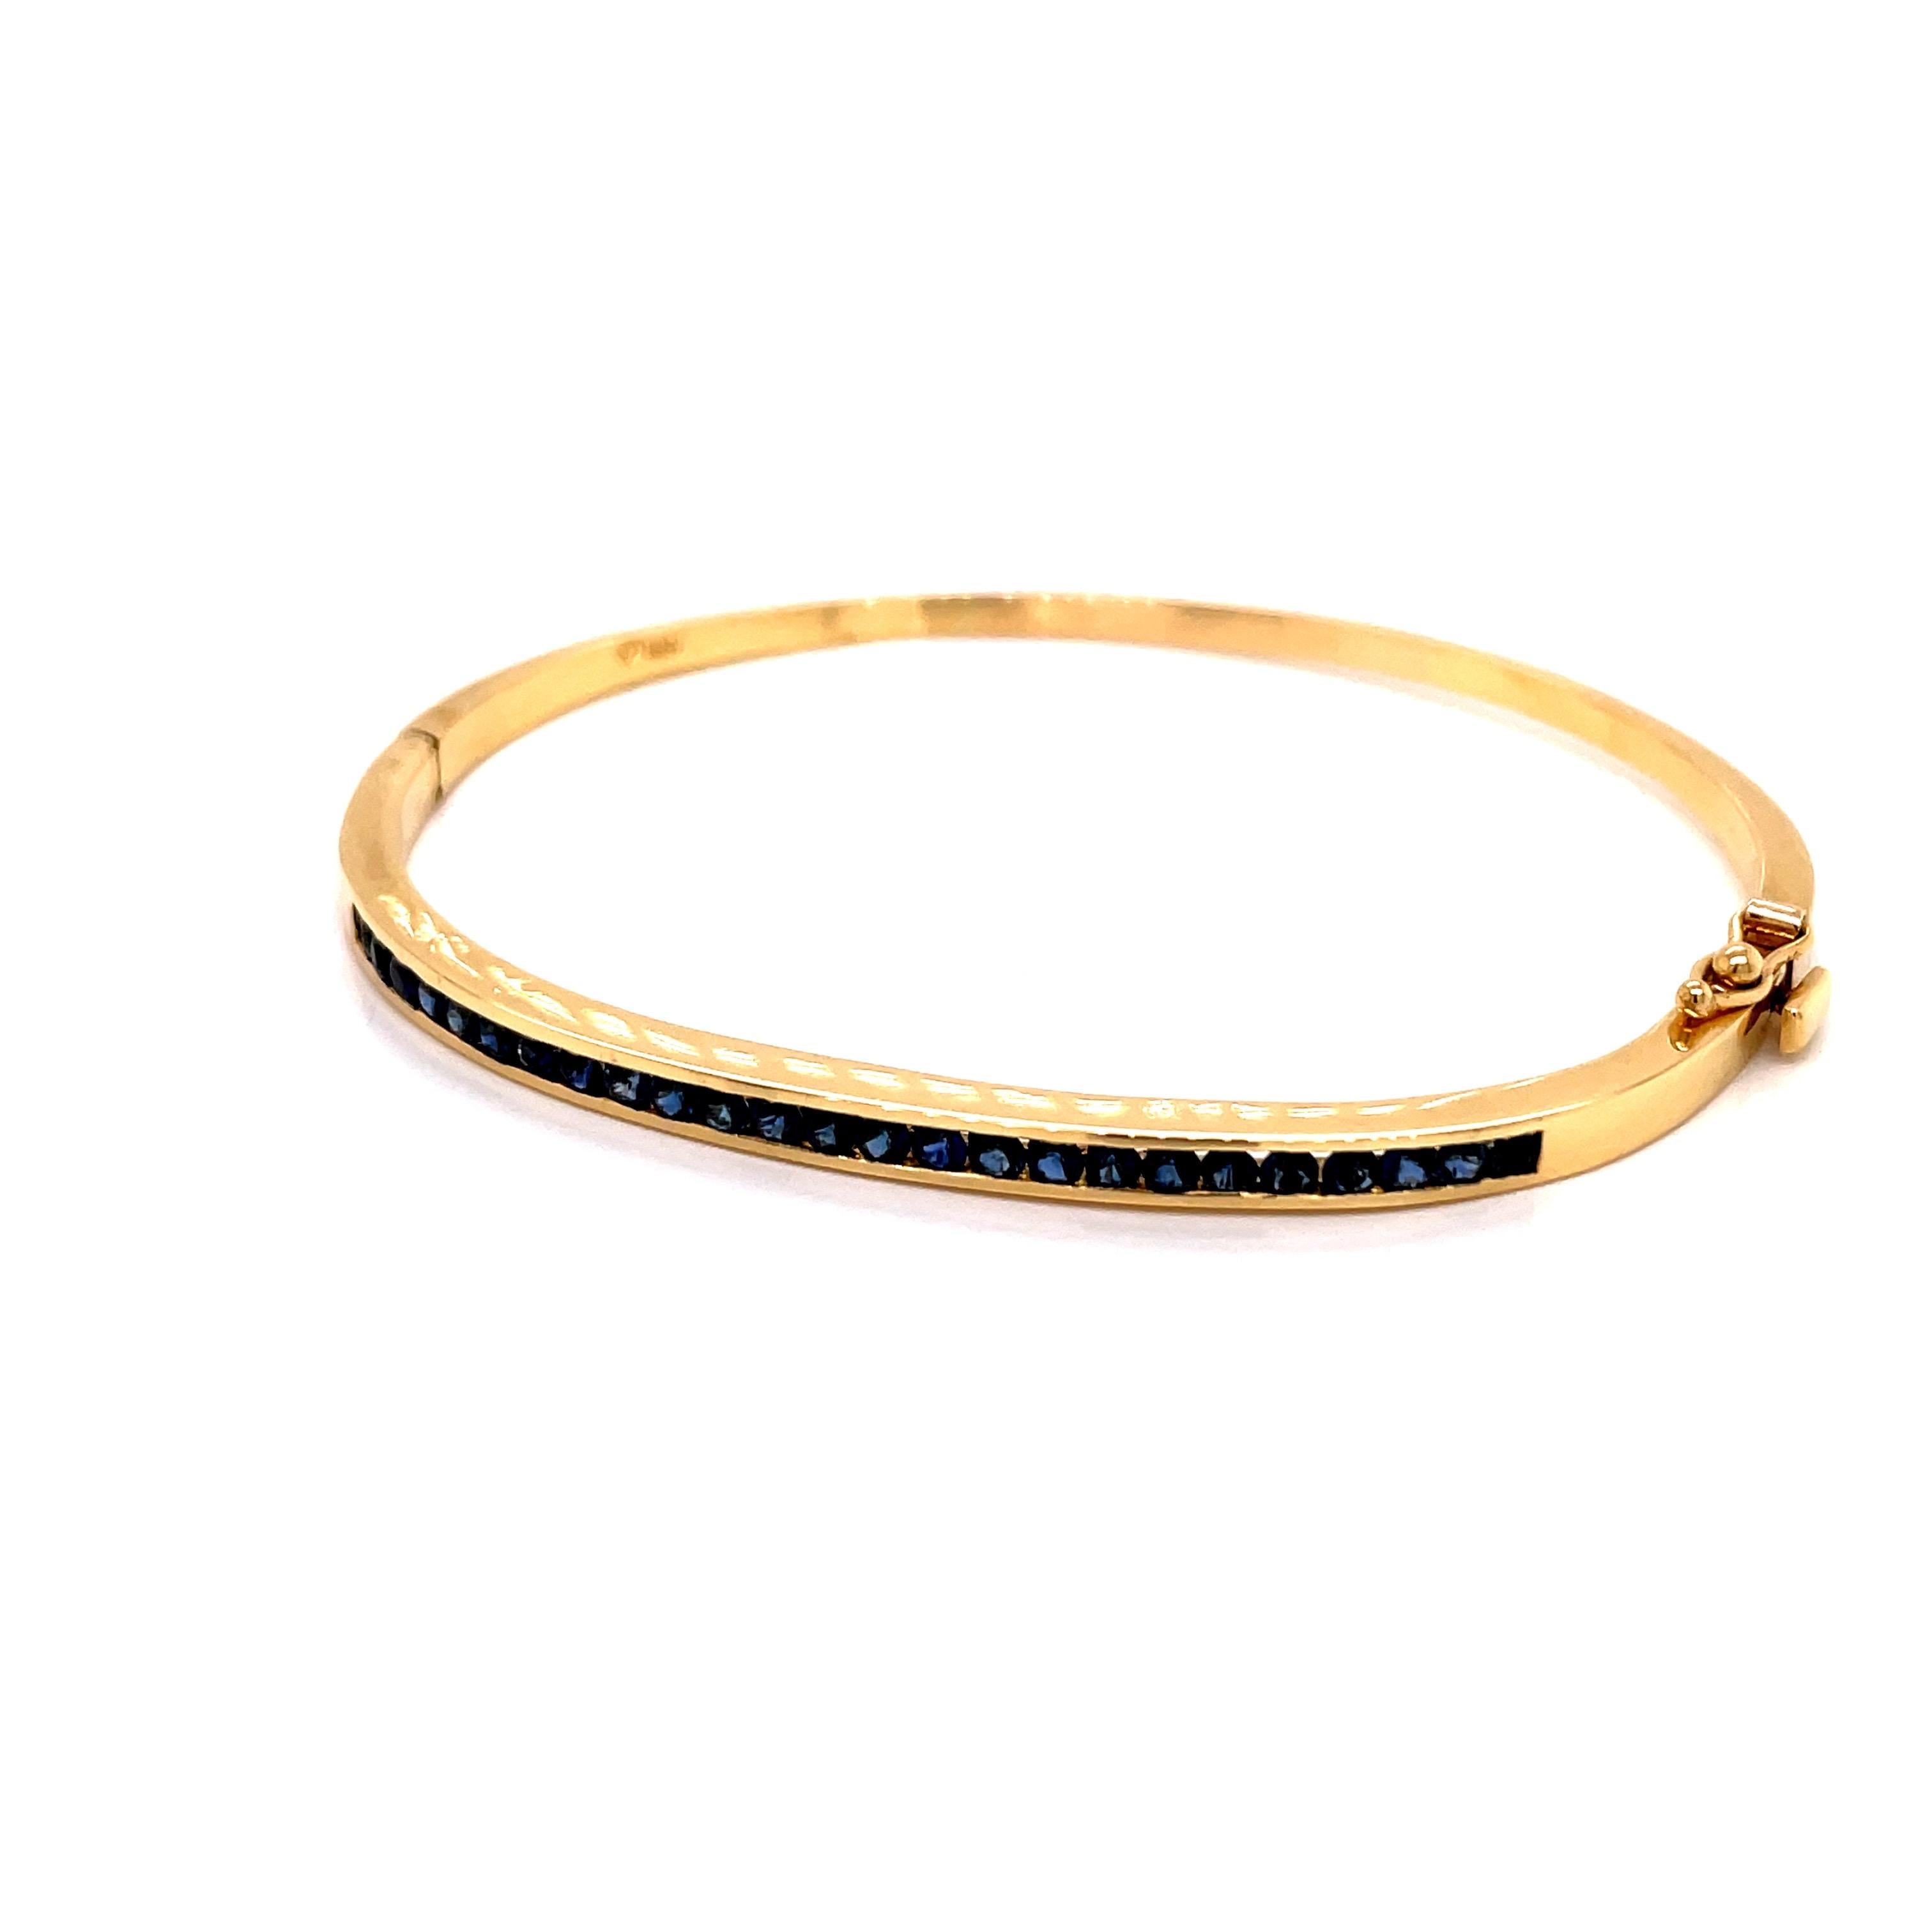 18K Yellow Gold Bangle Bracelet Channel Set Sapphires - The bangle contains 25 round sapphires weighing approximately 1.50ct. The bangle measures 3.6mm wide on the top and 2.3mm wide on the bottom. The inside diameter is 2.12 inches high and 2.5